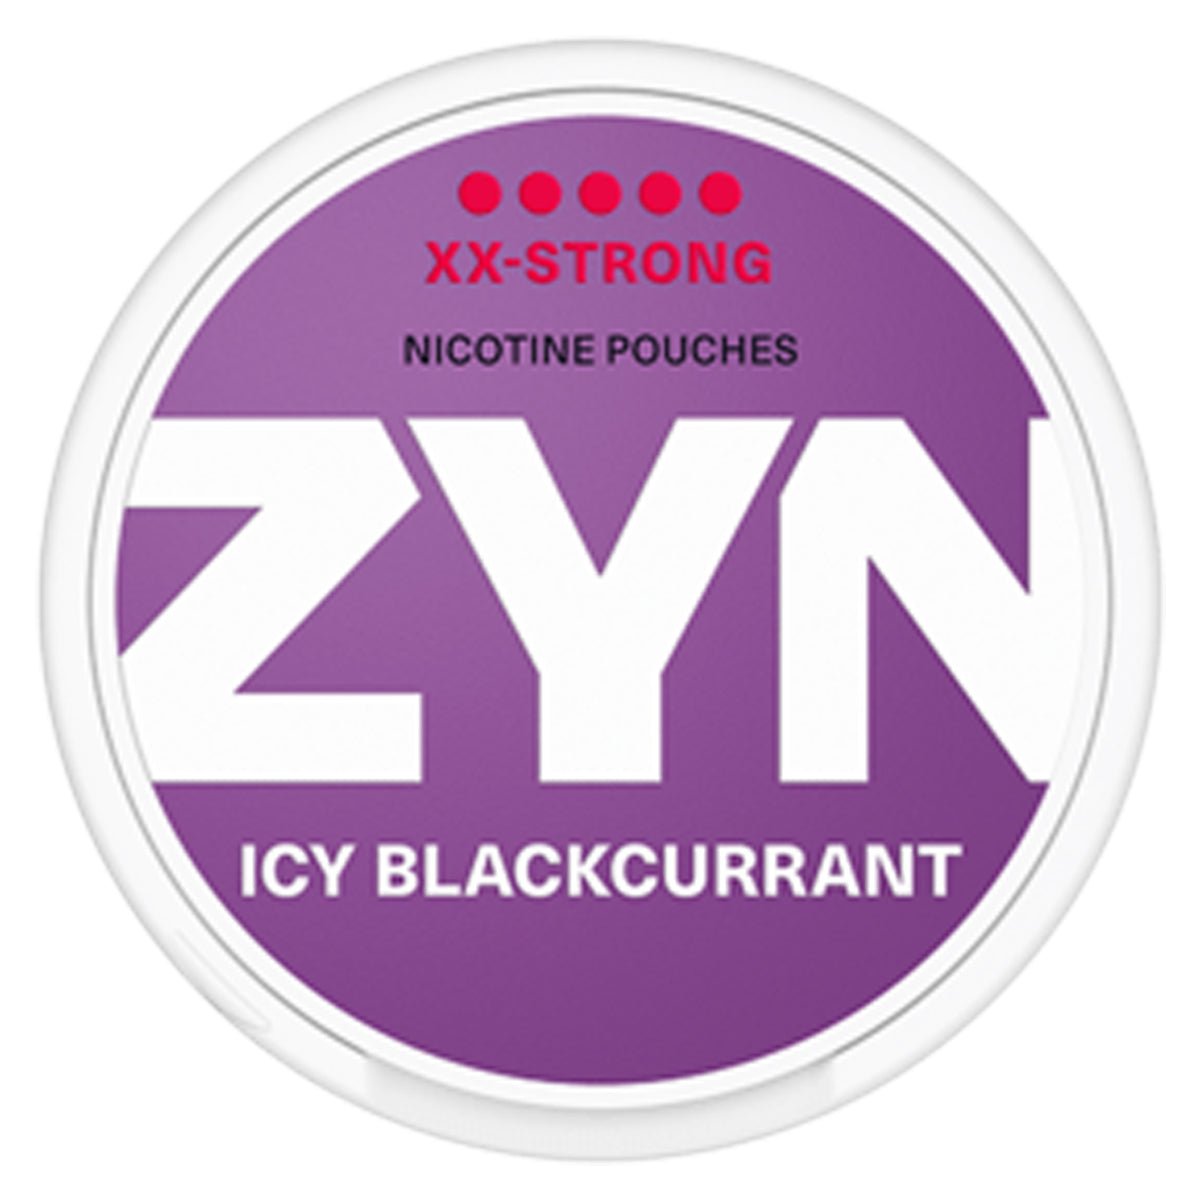 Icy Blackcurrant XX-Strong Nicotine Pouches By Zyn - Prime Vapes UK